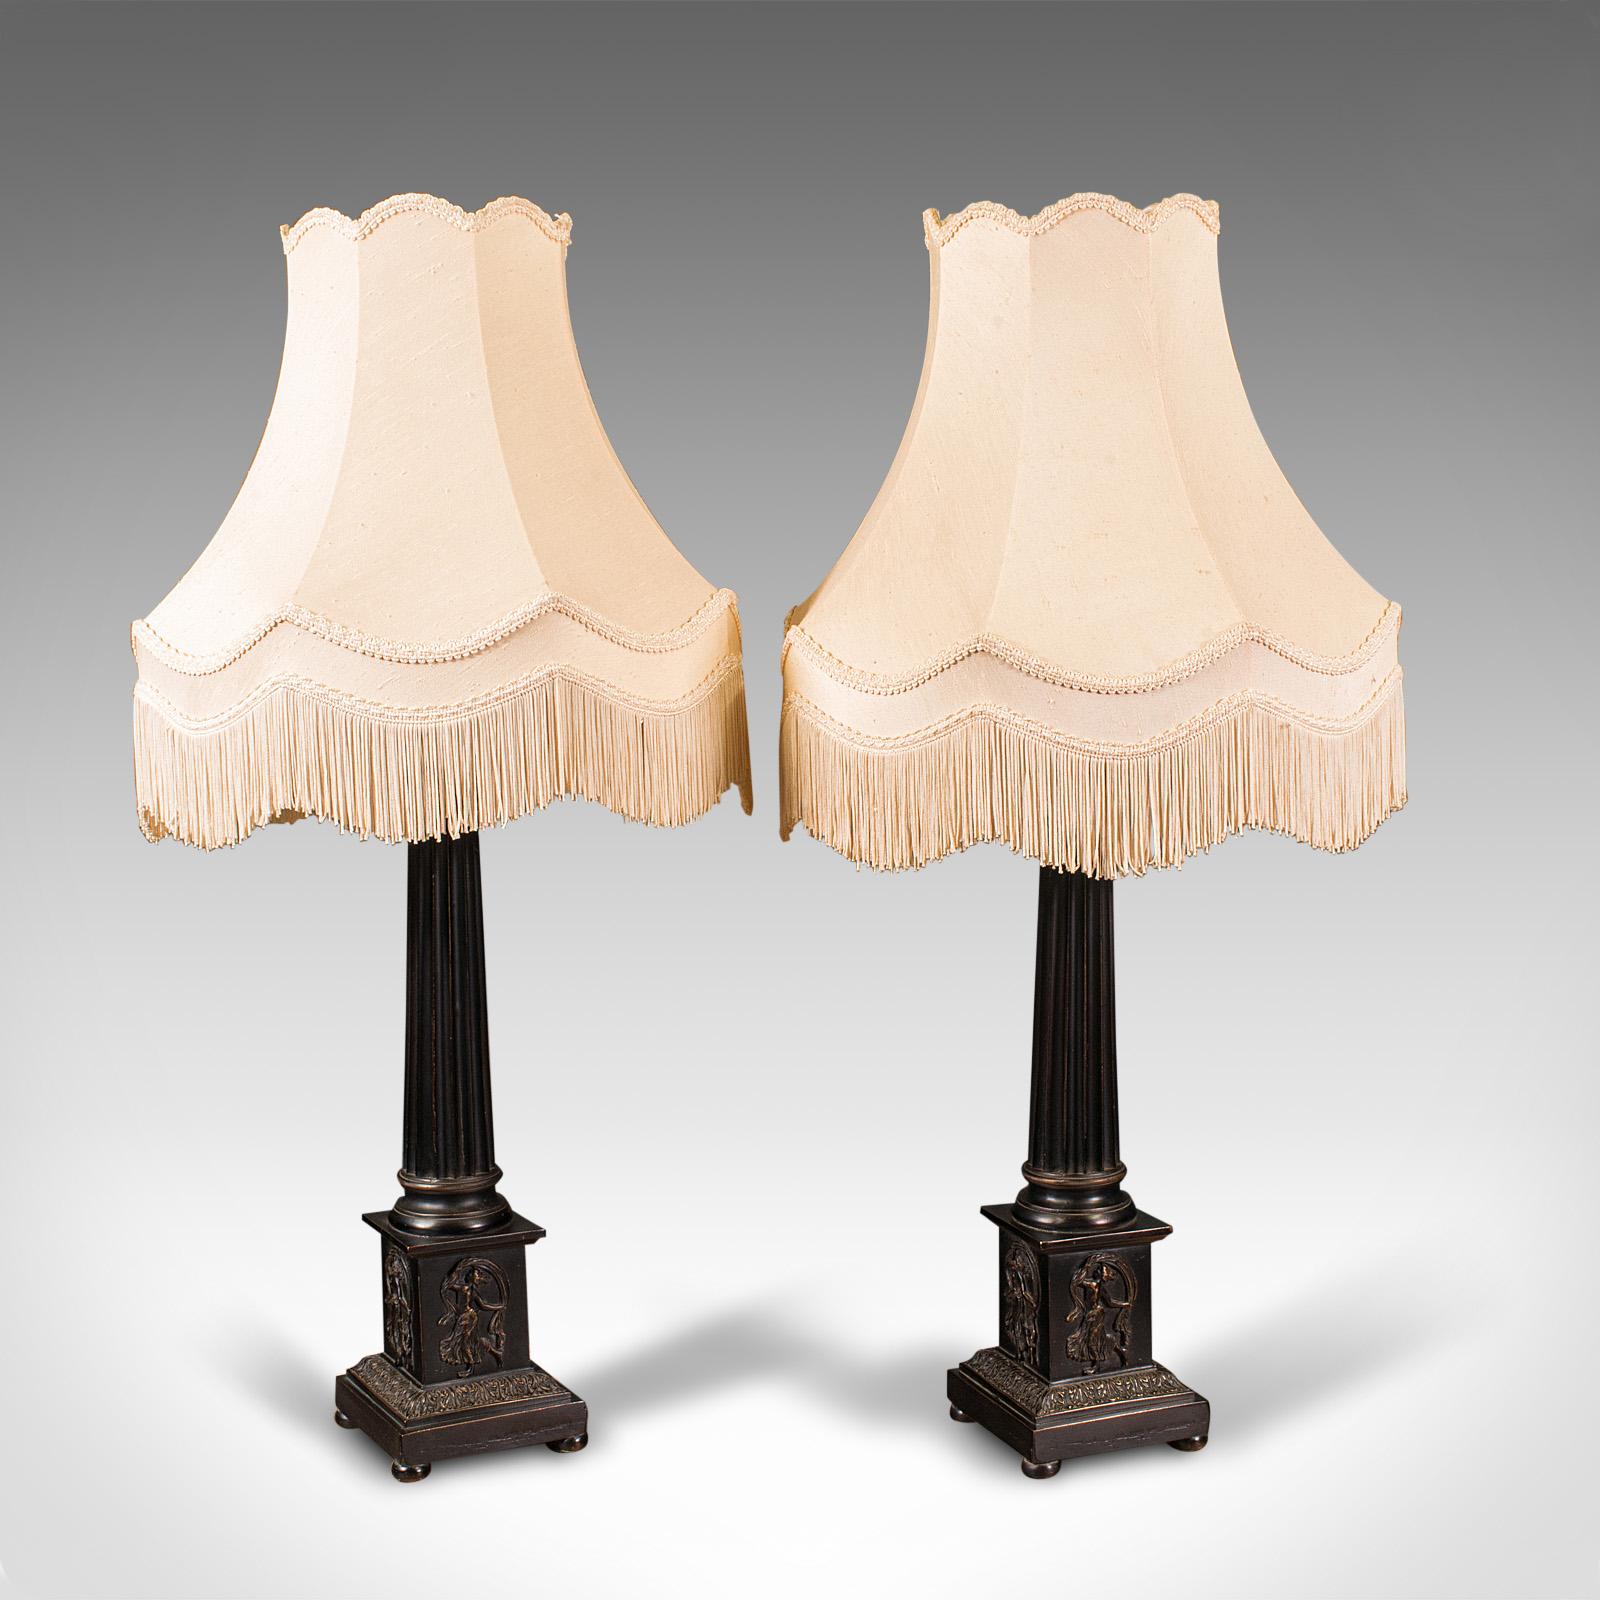 This is a pair of vintage Corinthian lamps. An English, faux cast bronze table lamp with classical taste, dating to the late 20th century.

Of generous proportion, with distinguished Corinthian column base
Displays a desirable aged patina and in